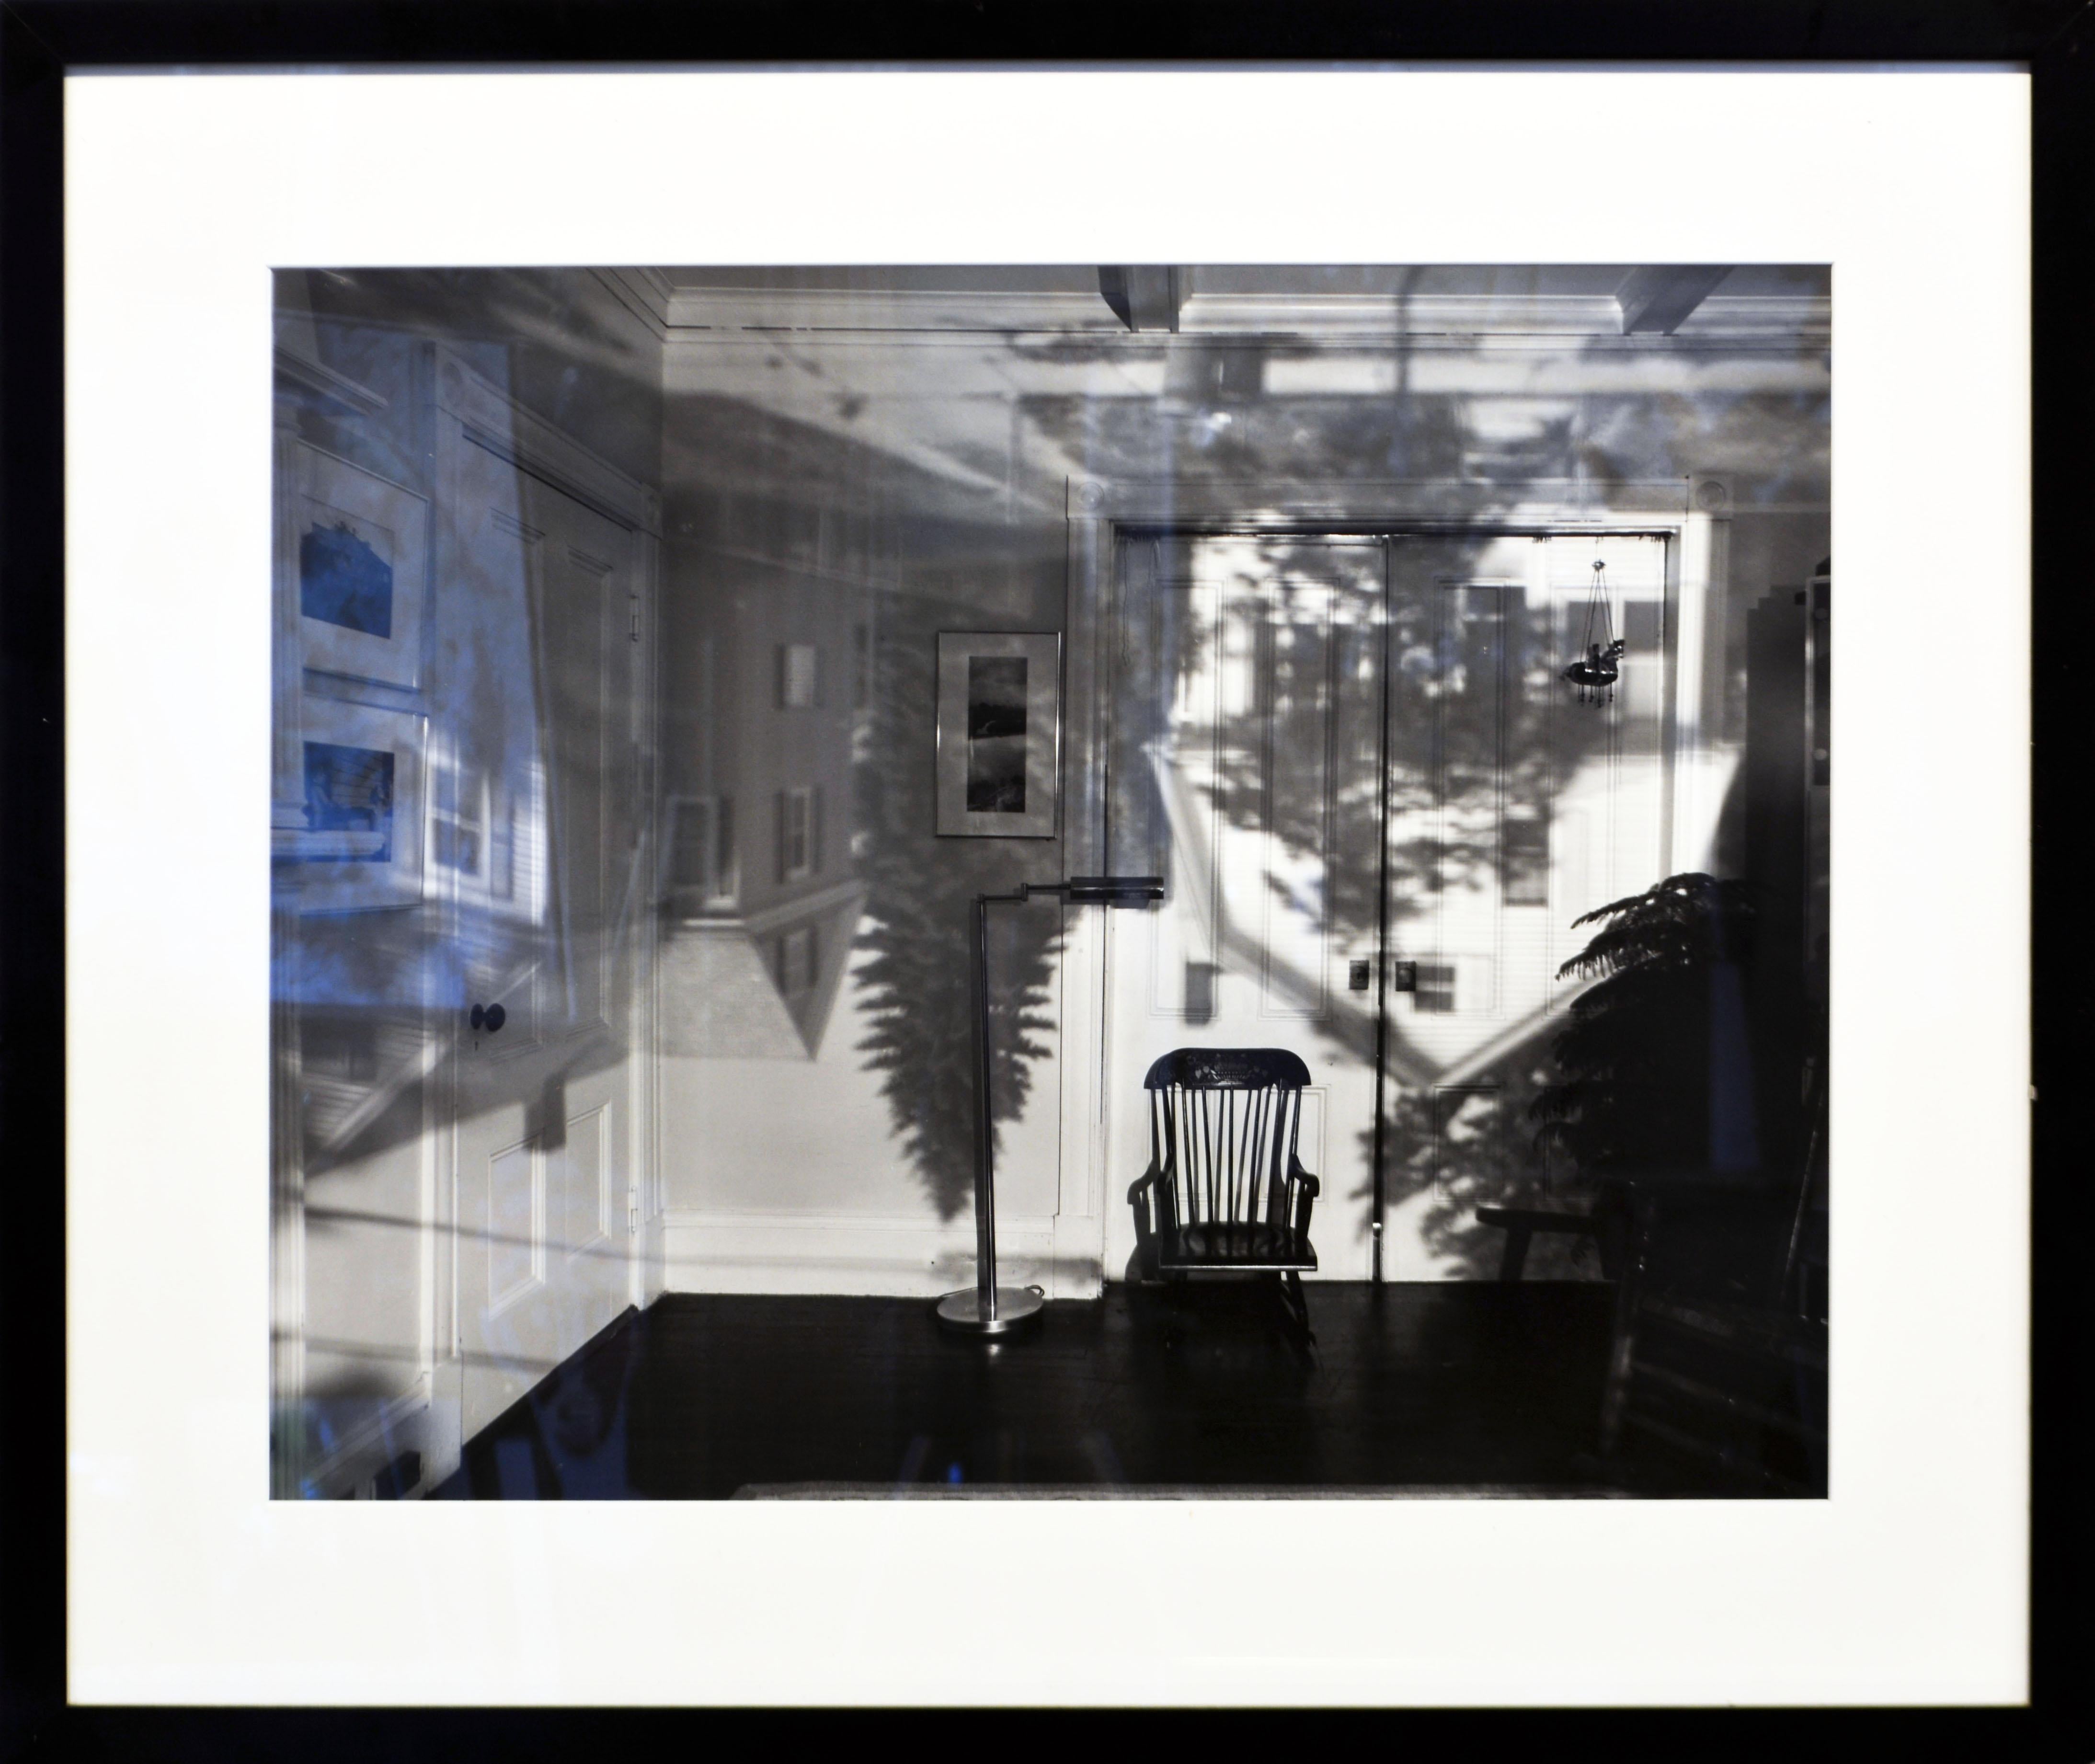 Abelardo Morell, Coban/American b. 1948.
'Camera Obscura Image of Houses Across the Street from Our Livingroom, 1991'
Silver gelatin print. Image: 17.75 x 22.5 in / 46 x 57 cm. Signed and inscribed verso. 
Item has ben inspected out of the